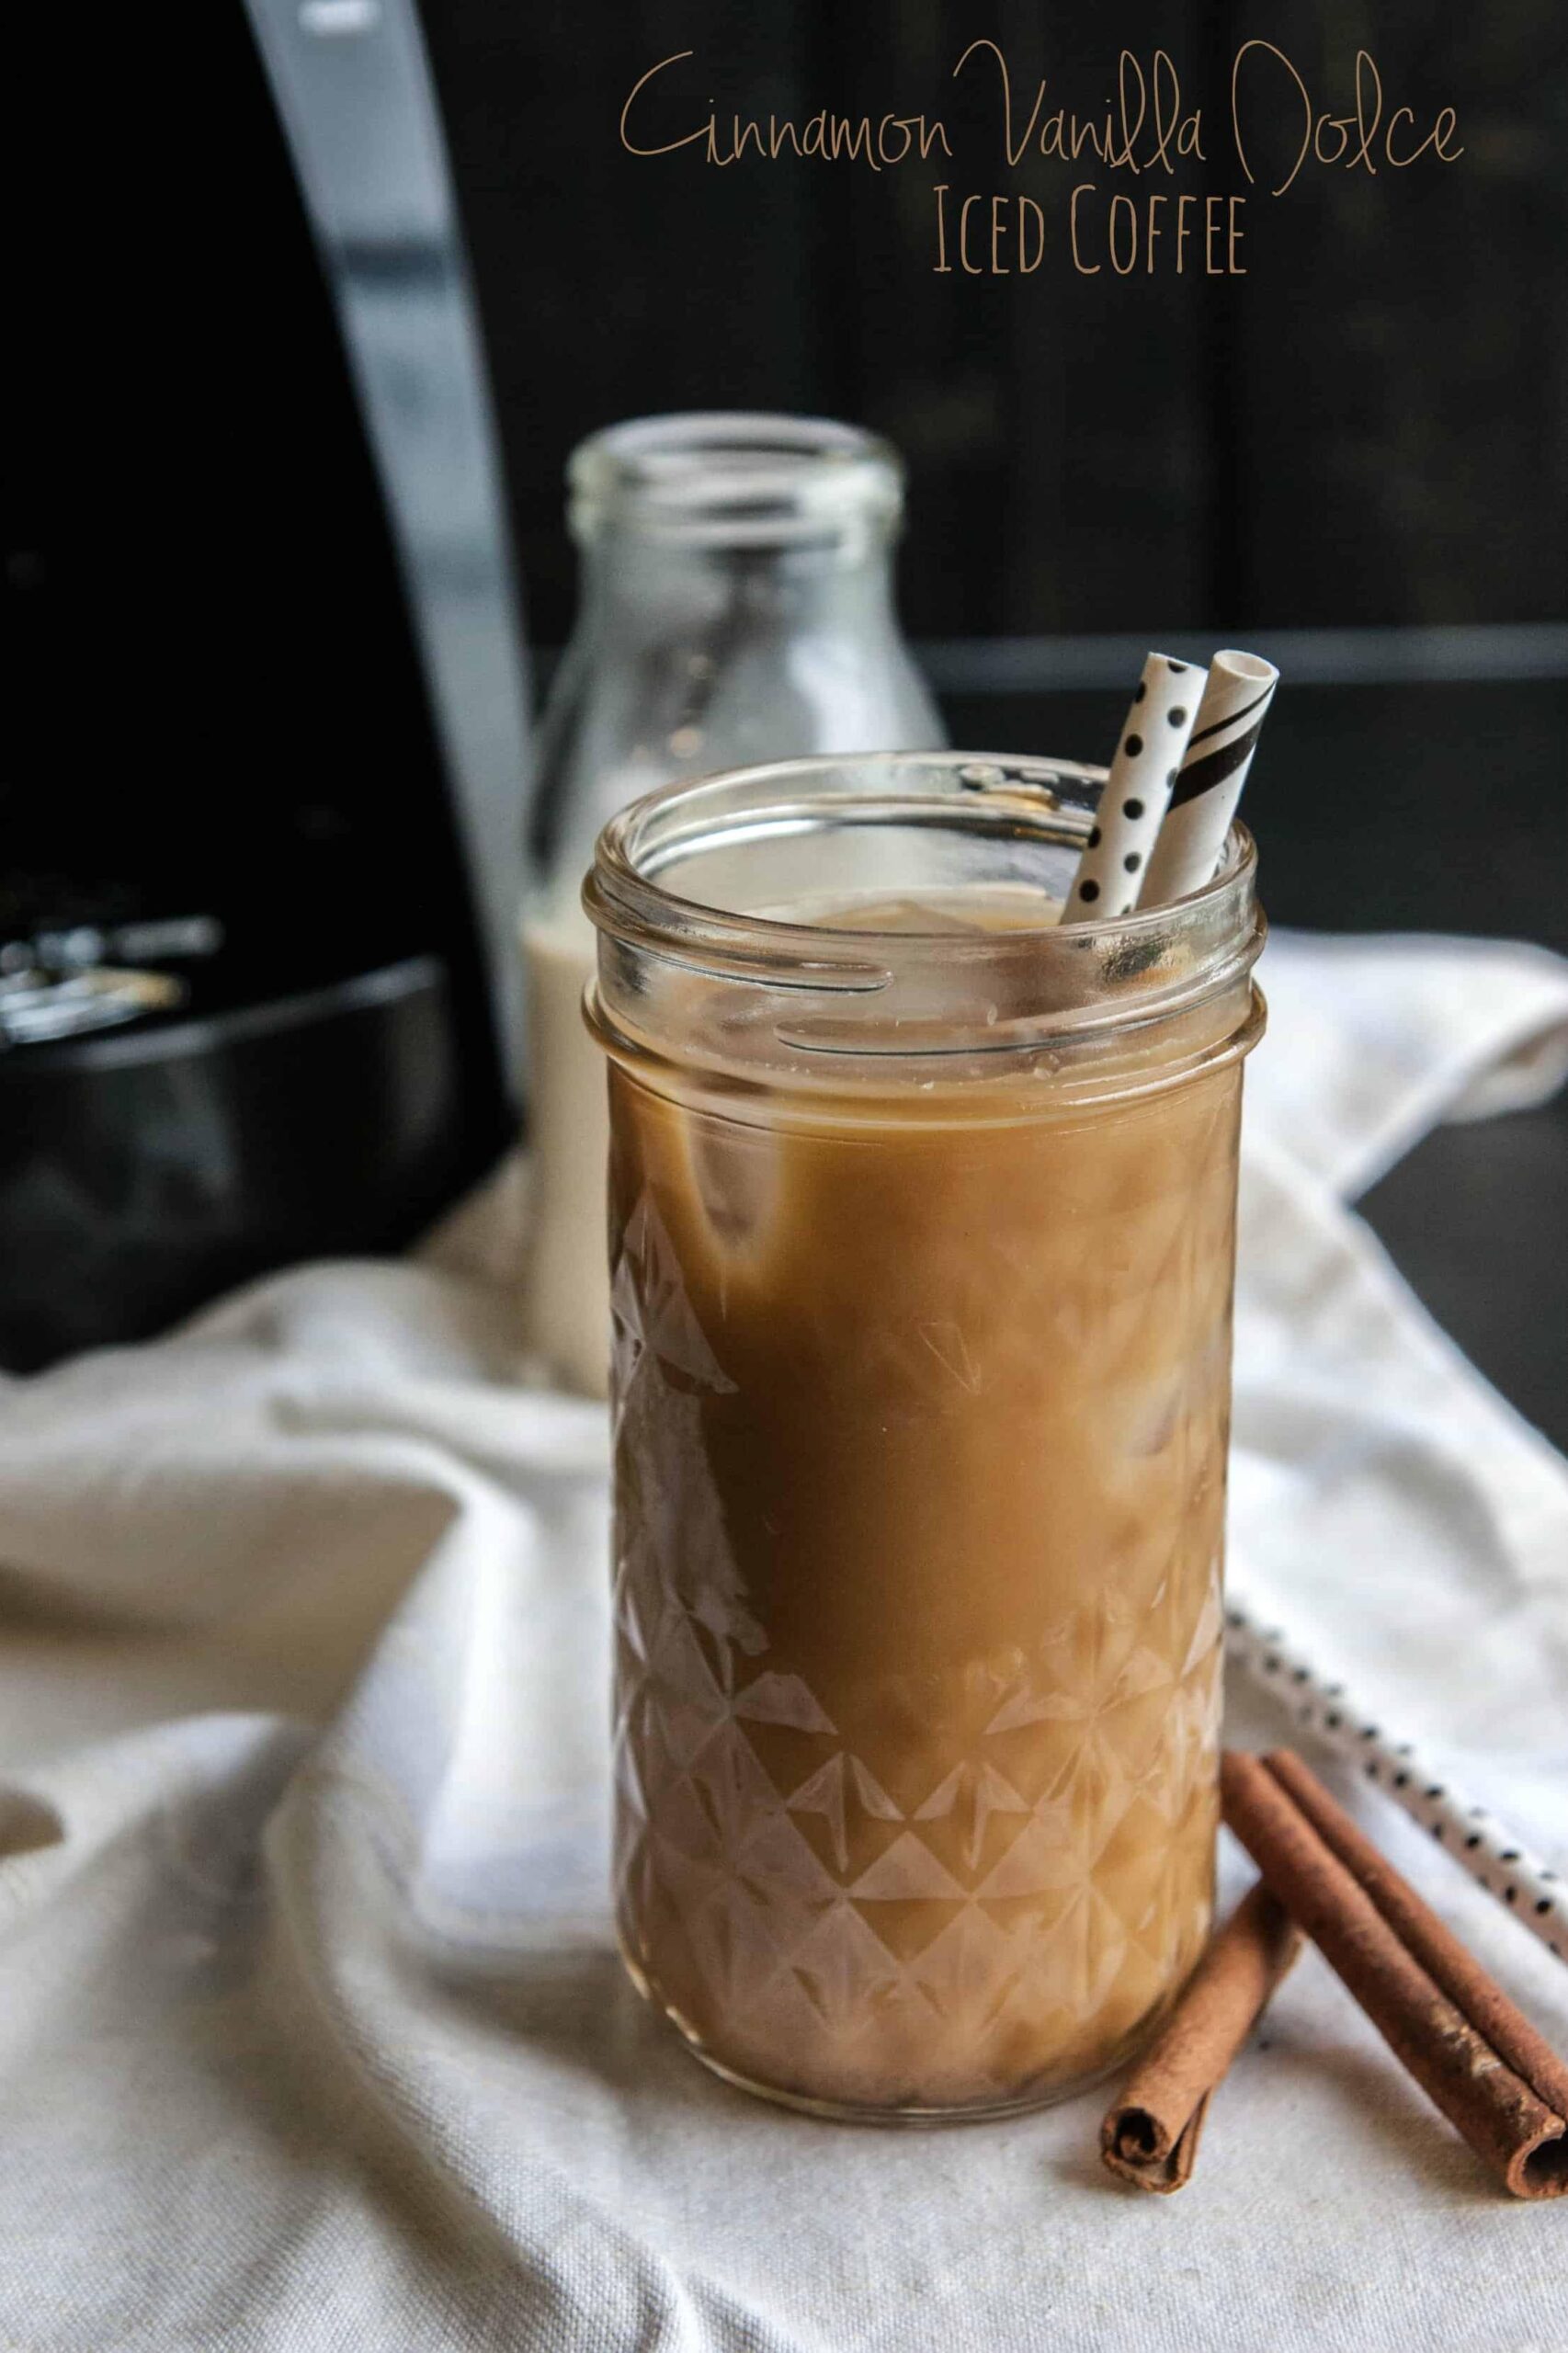  Add a little spice to your daily routine with this Iced Cinnamon Coffee.